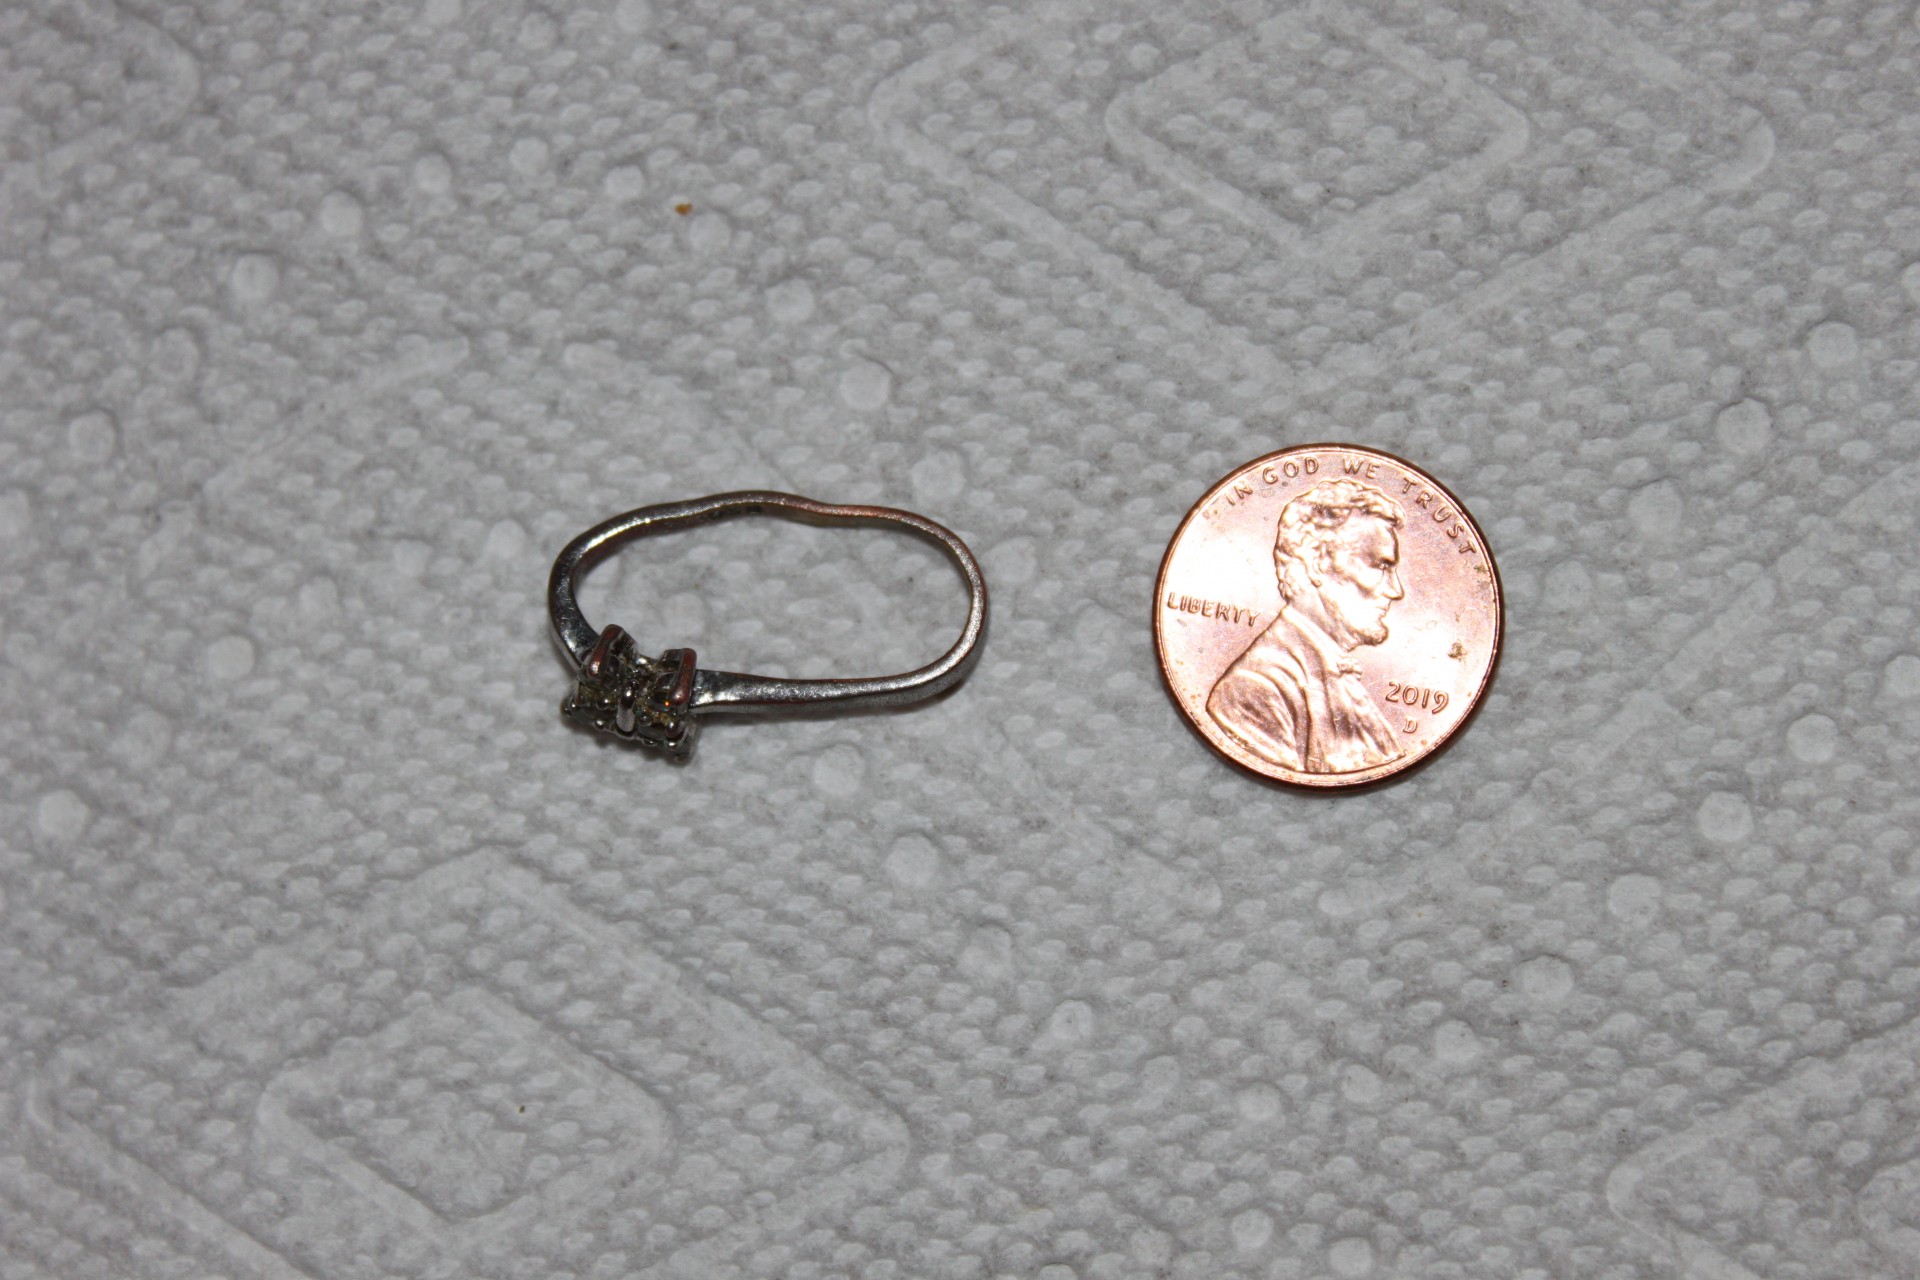 Rsc On A Ring Metal Detecting For Jewelry